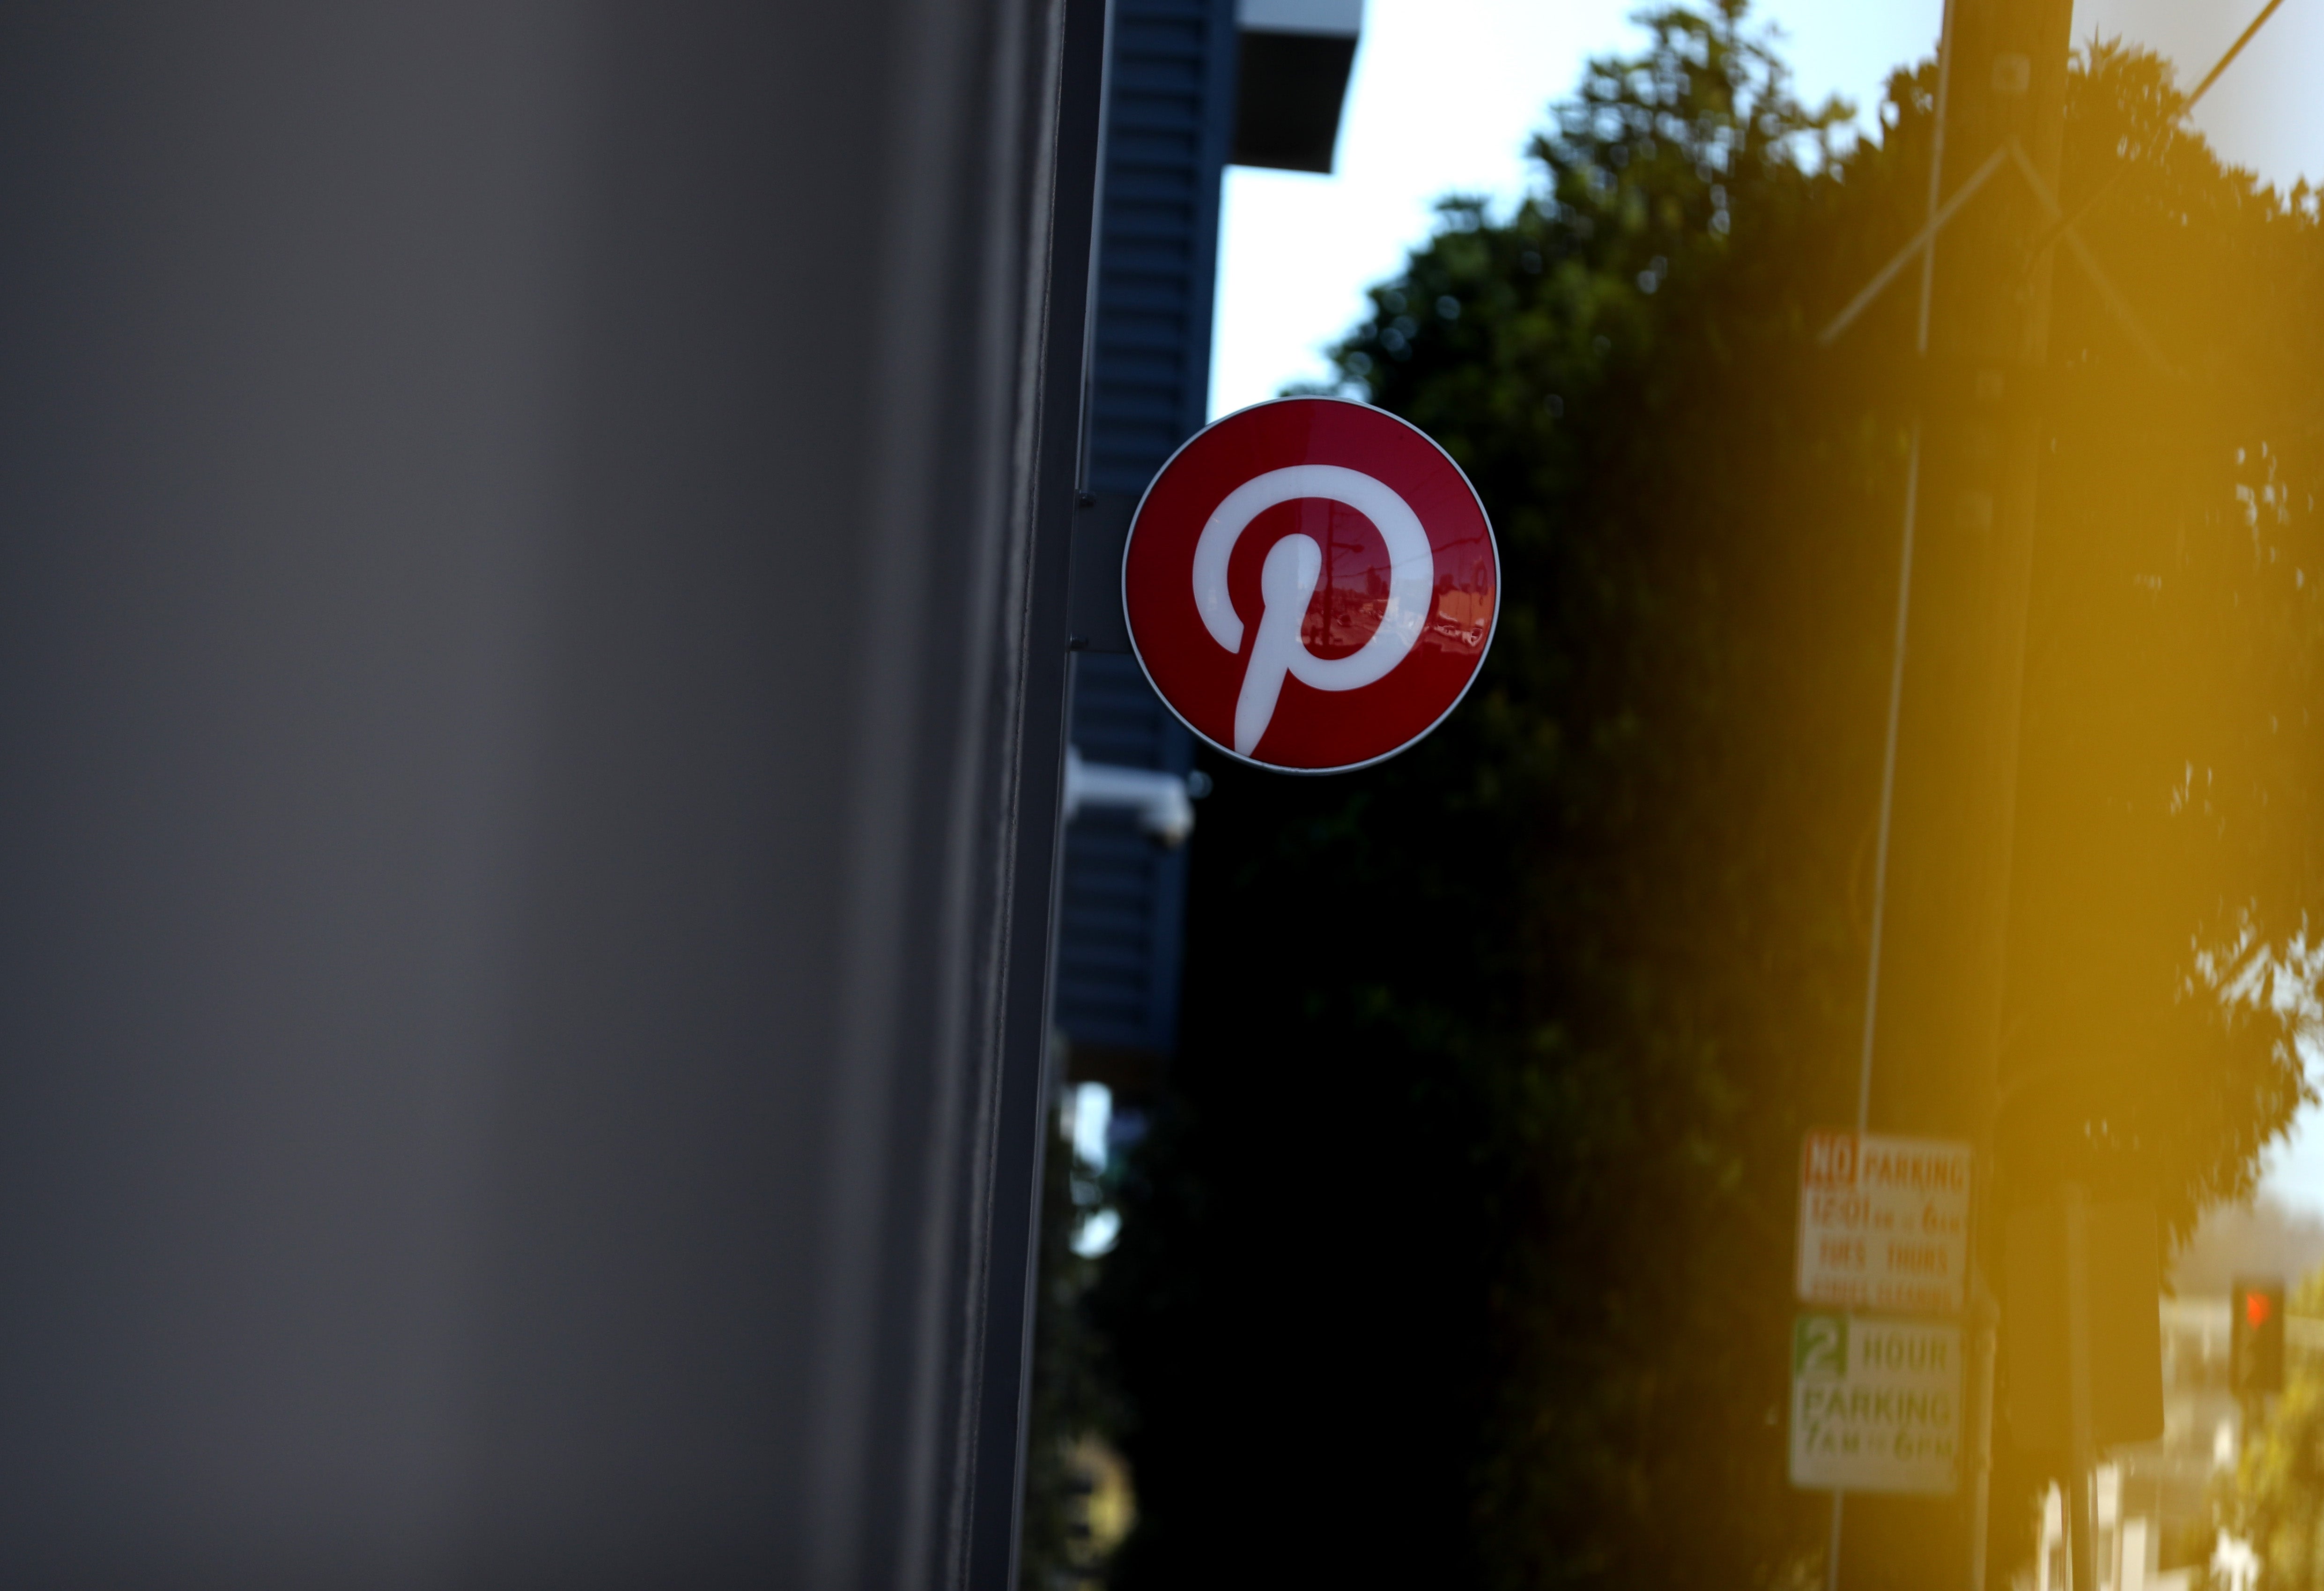 Over the past two years, Pinterest has faced gender discrimination allegations from female employees